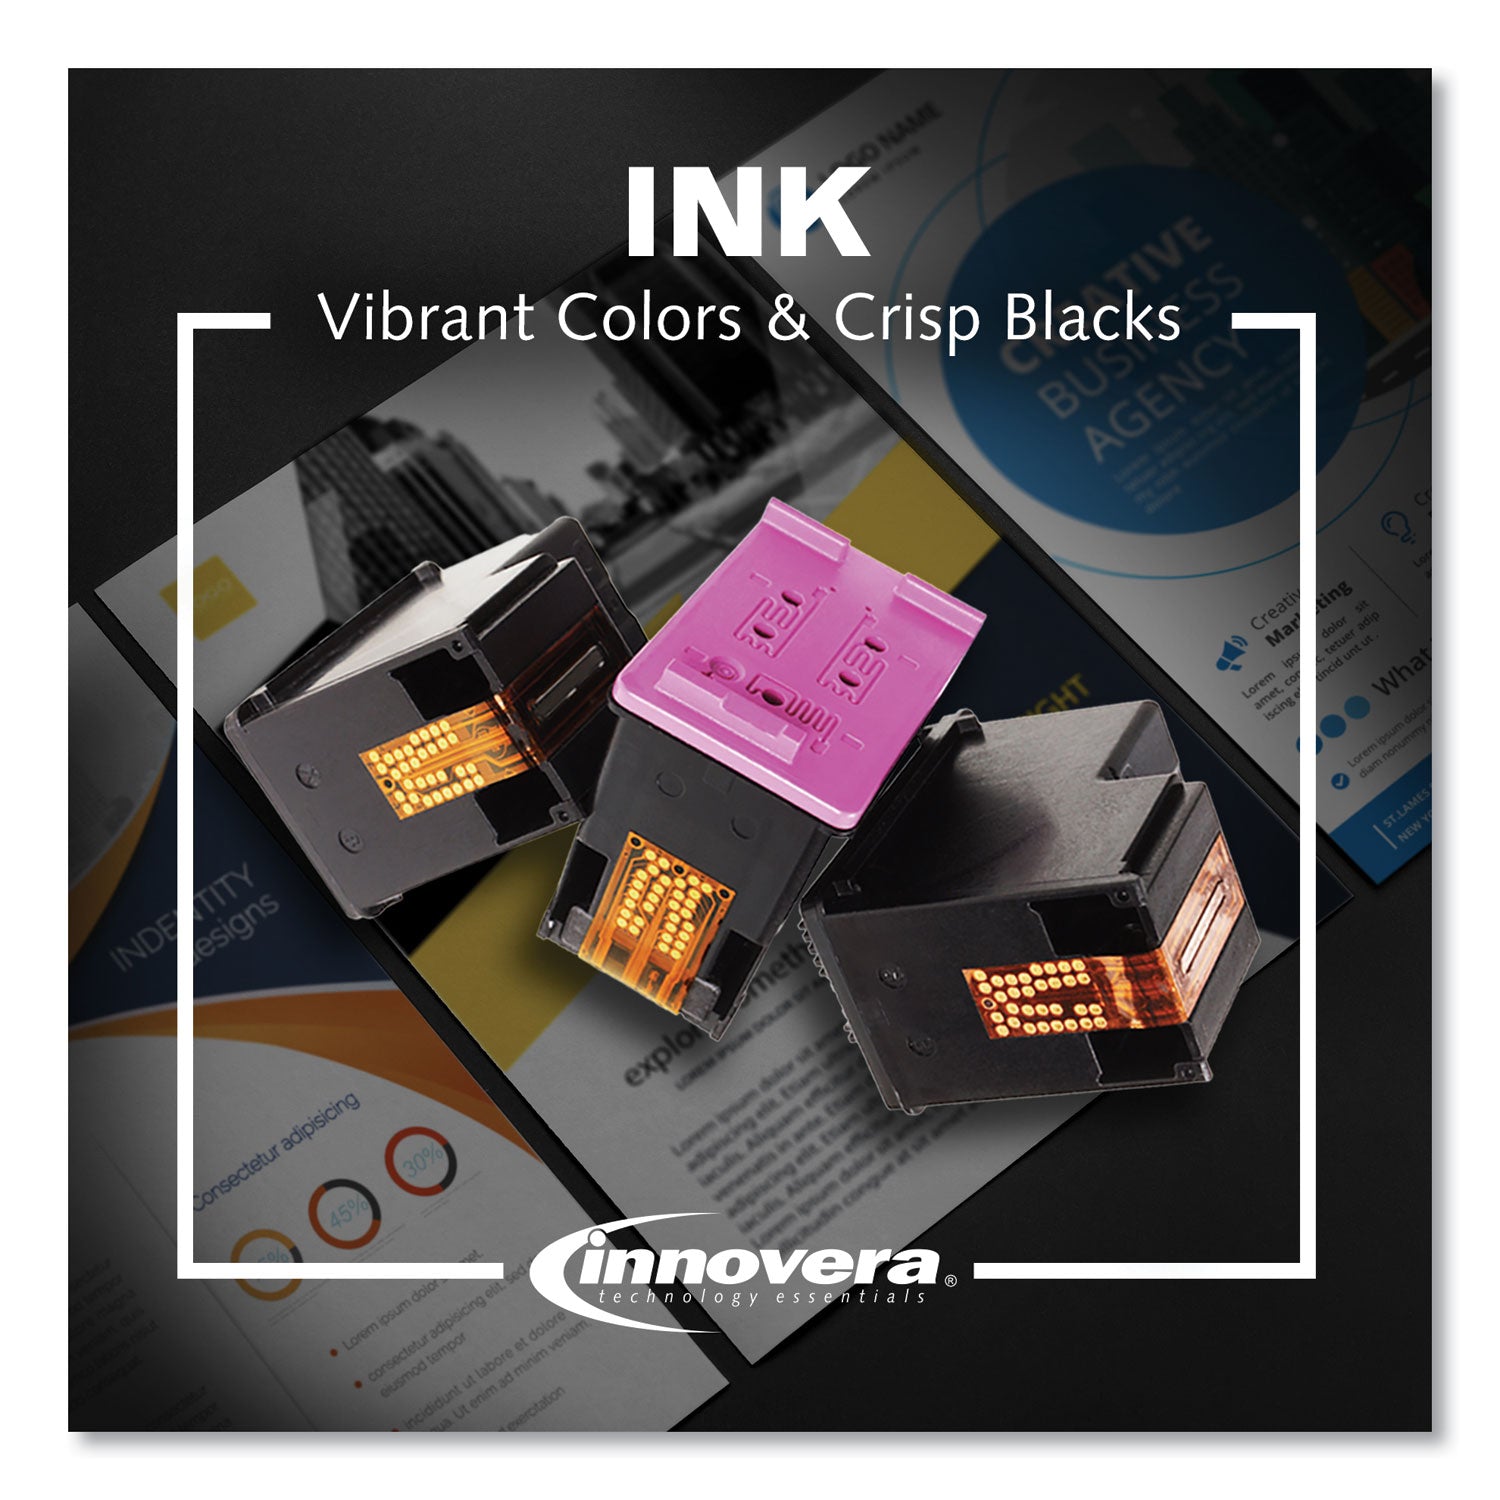 Remanufactured Yellow High-Yield Ink, Replacement for 951XL (CN048AN), 1,500 Page-Yield - 